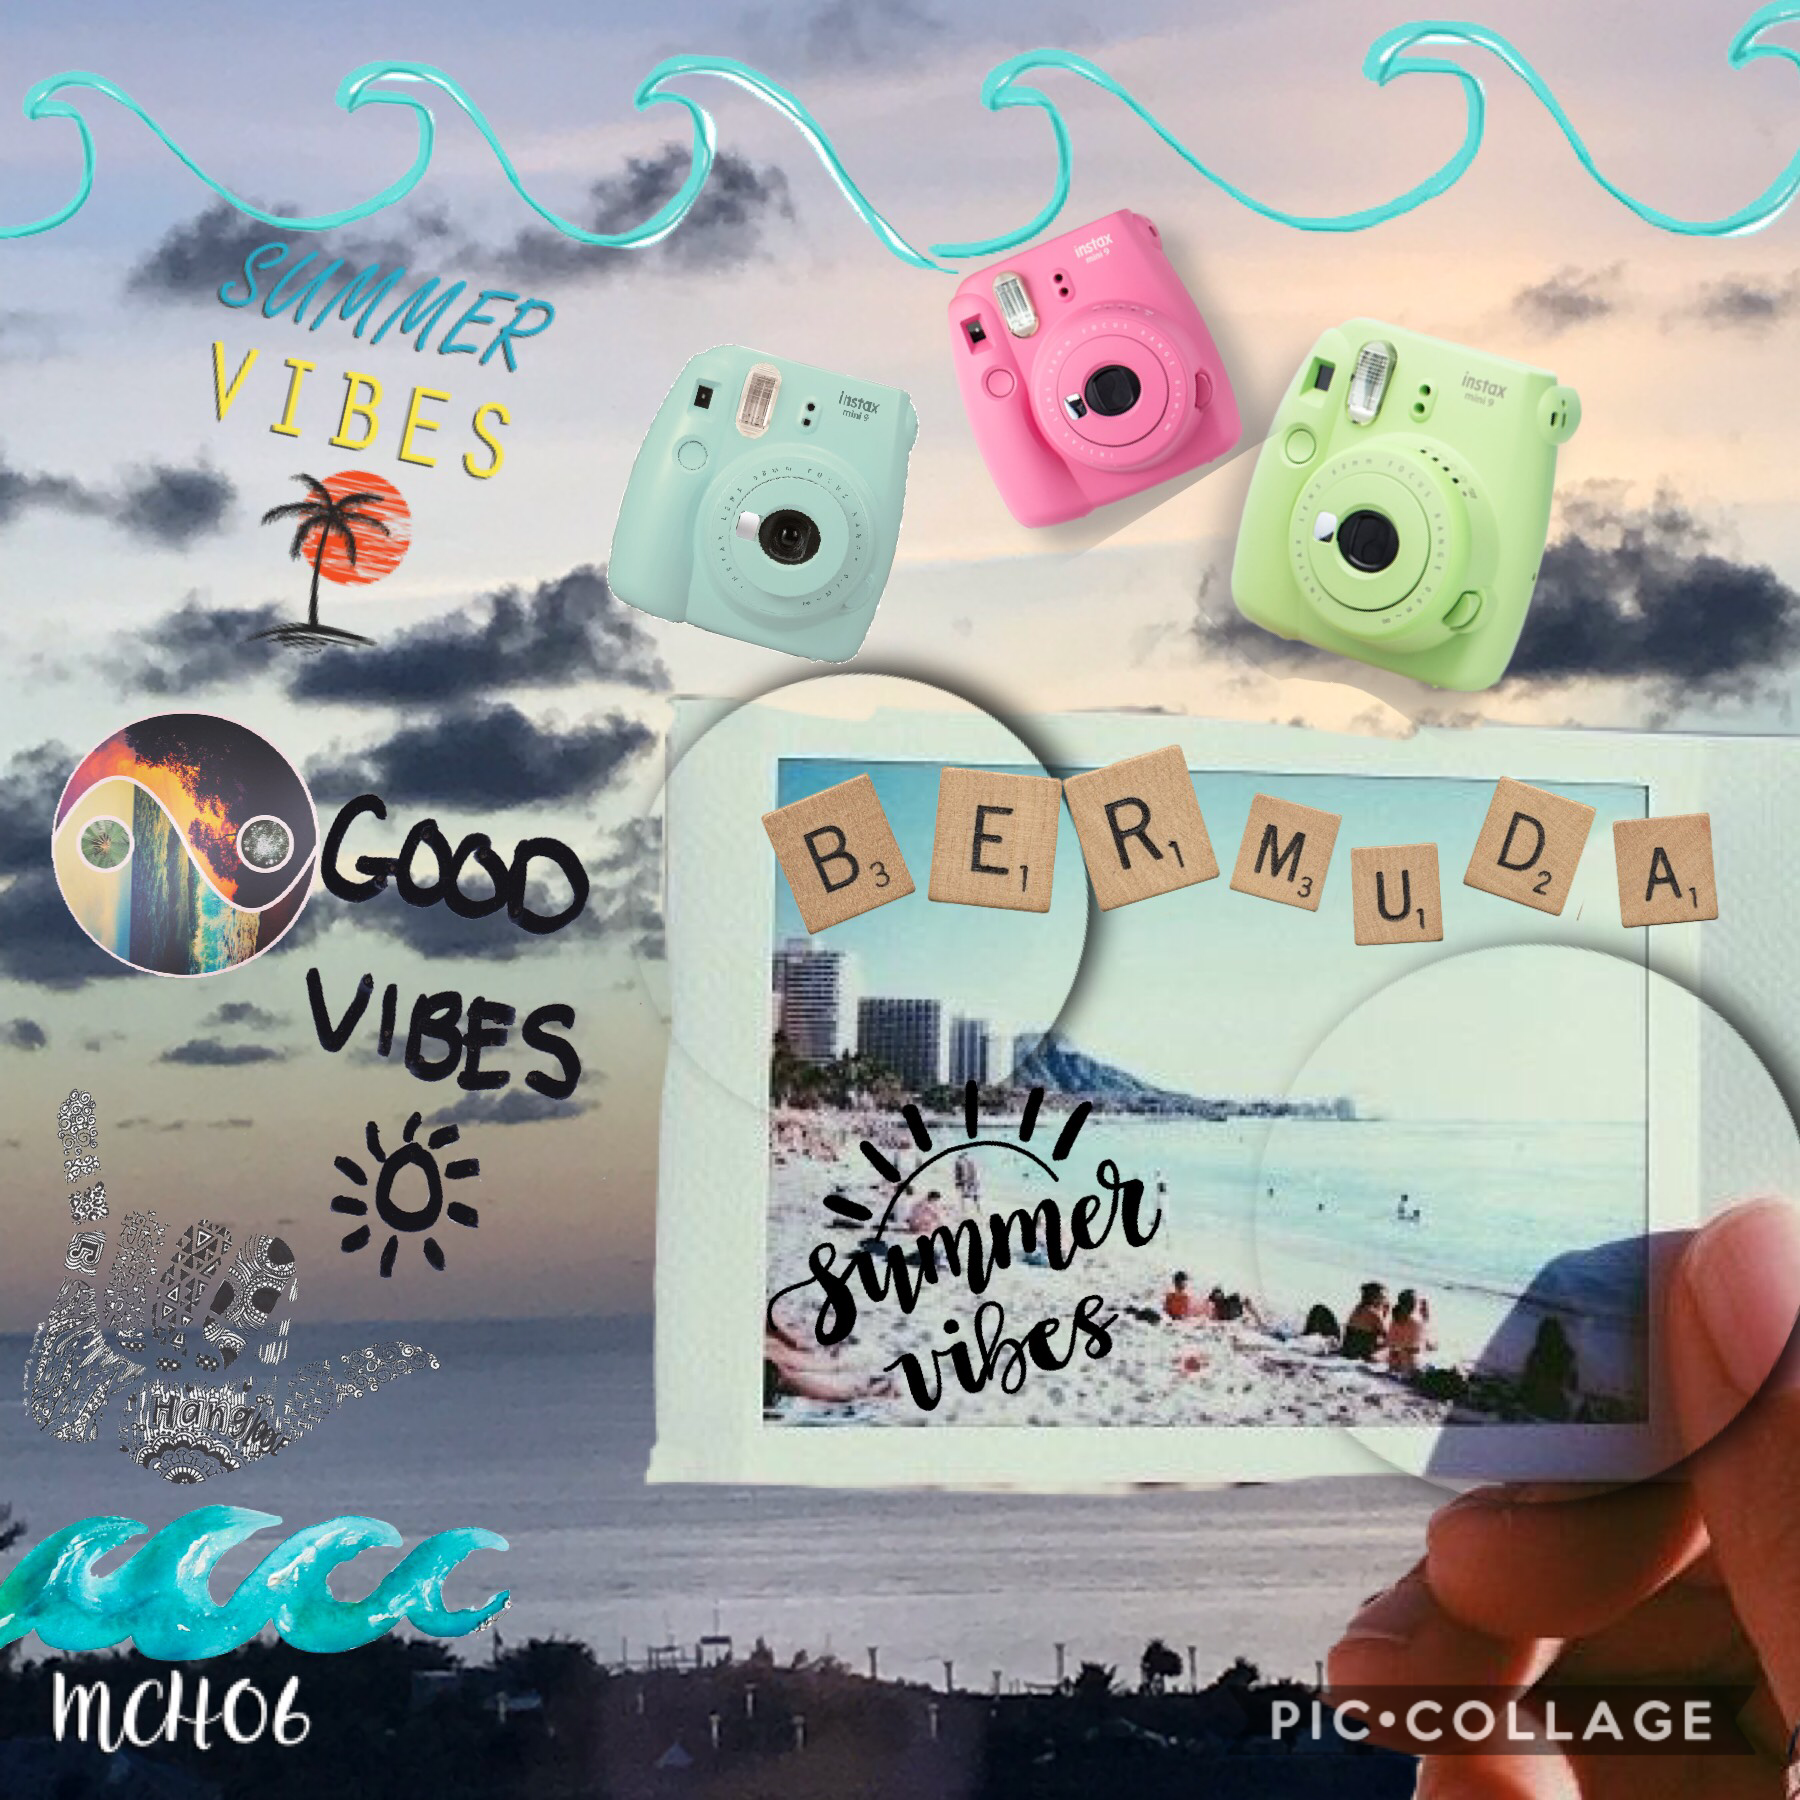 My Bermuda summer vibes collage! I photographed the background when I went to Bermuda!